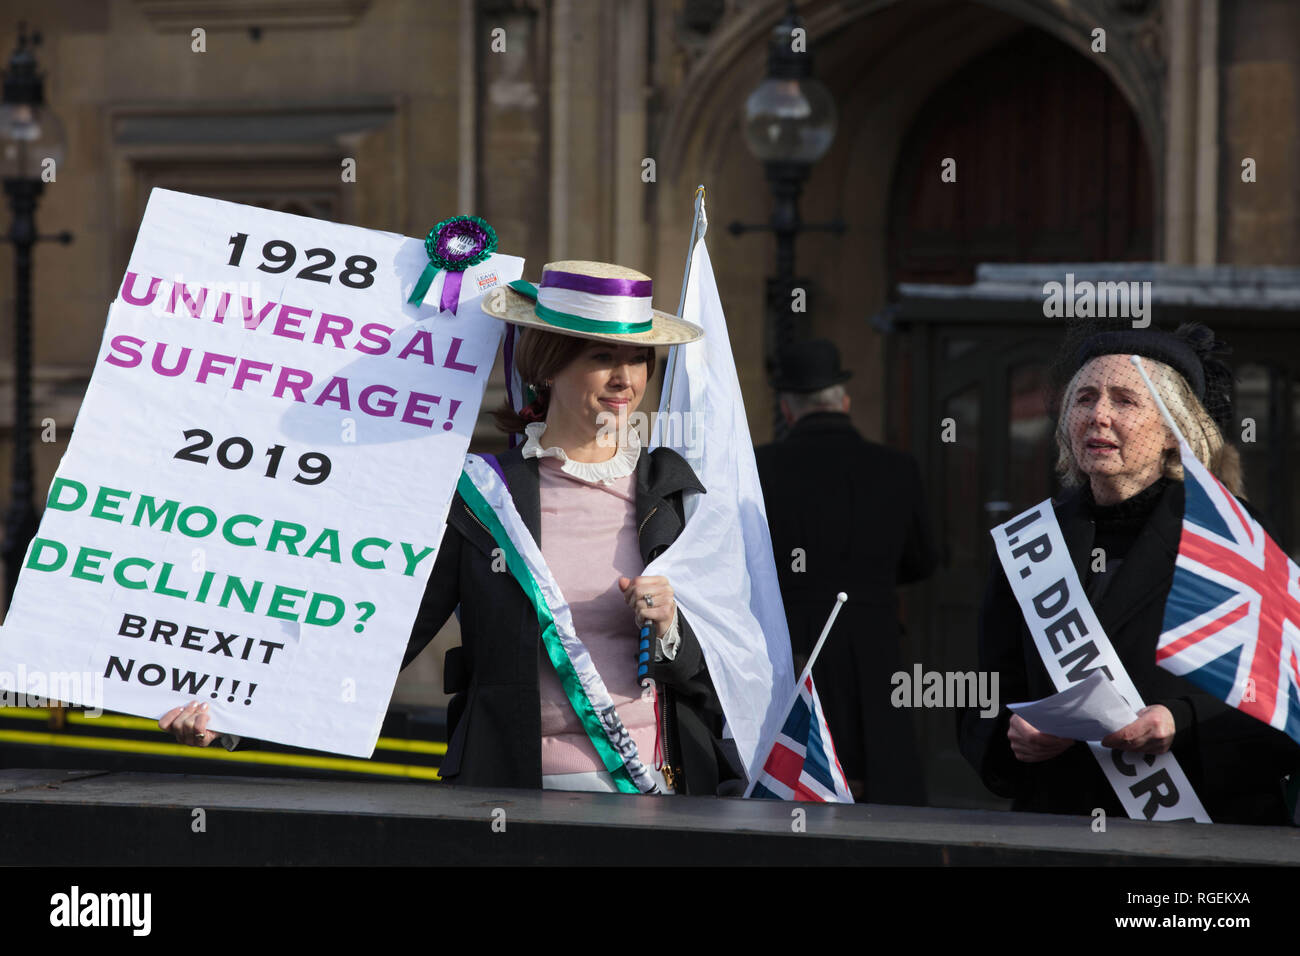 London, UK. 29th January, 2019. Two women dressed up as Suffragettes, reminding us about the fight for democracy, which, they claim, is now denied. Place: in front of Parliament, London, UK. Credit: Joe Kuis / Alamy Live News Stock Photo